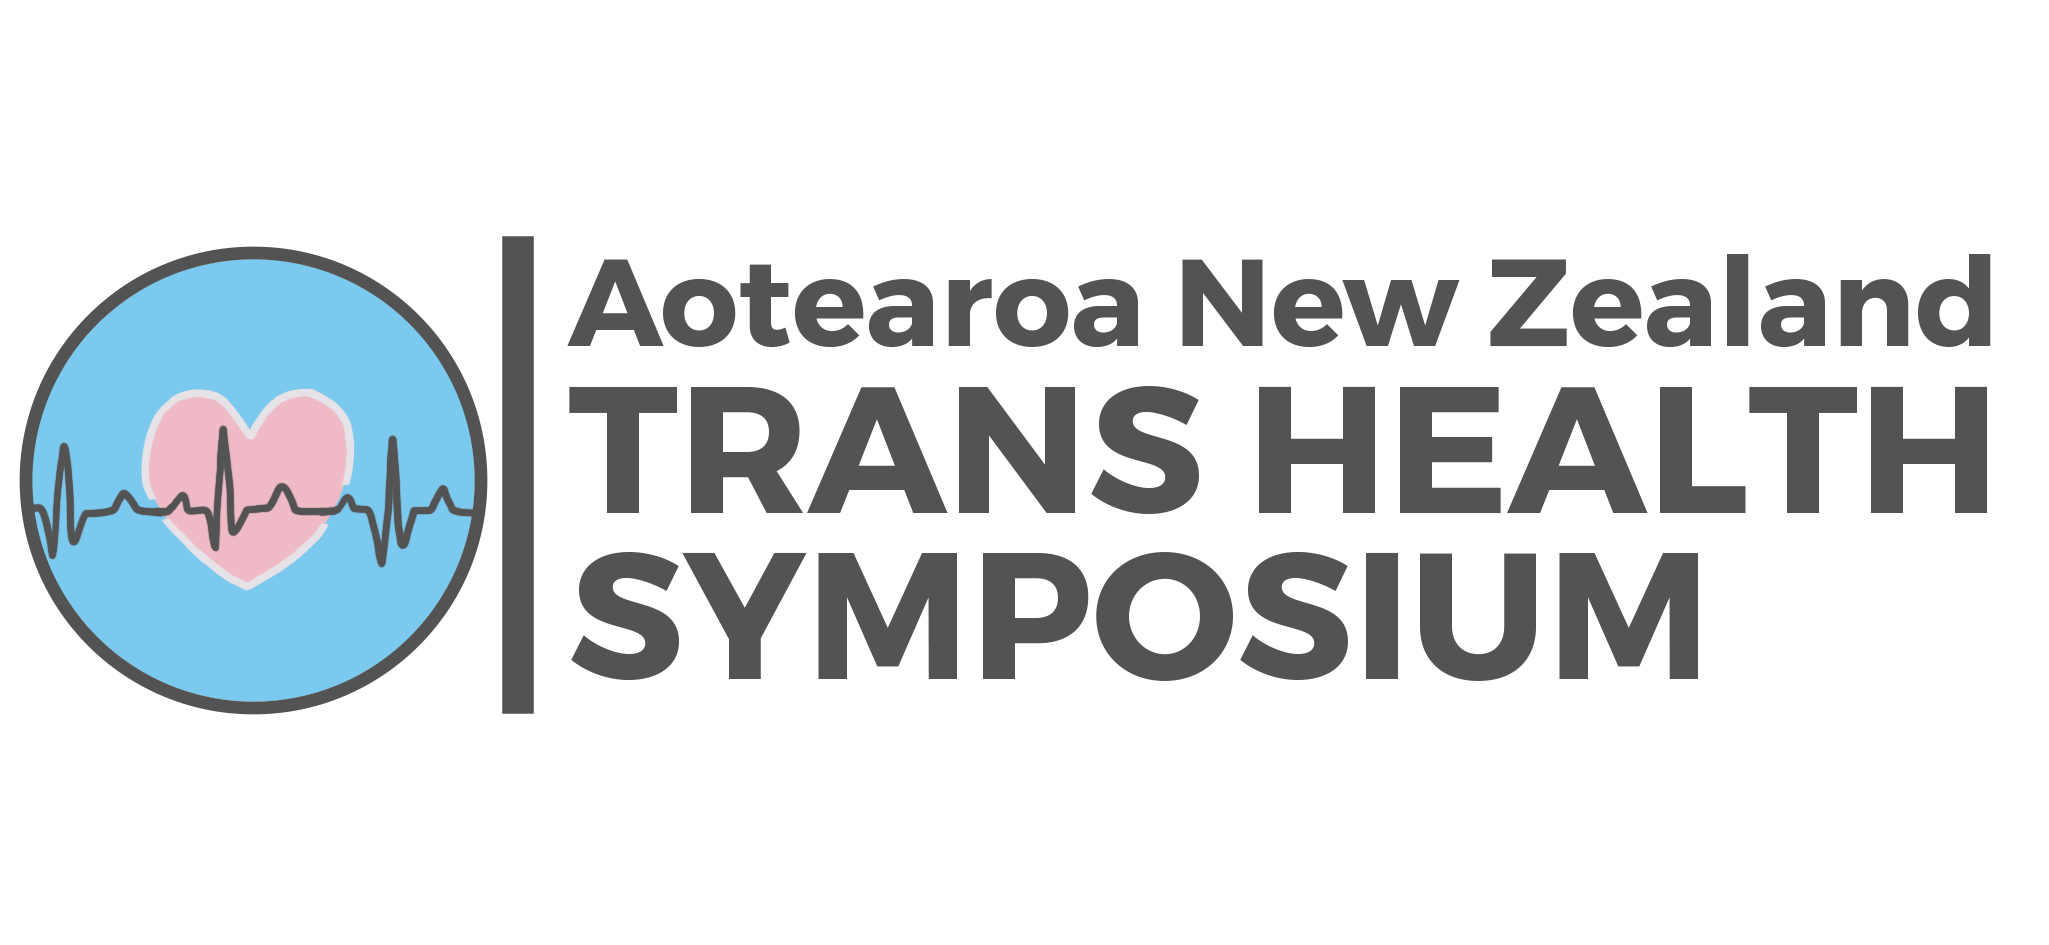 The words Aotearoa New Zealand Trans health Symposium with a GIF of three alternating symbols in the trans pride colours (white, pink and blue) . The images reflect partnership (two hands), trans rights (the trans pride flag) and health (a heart with a pulse).